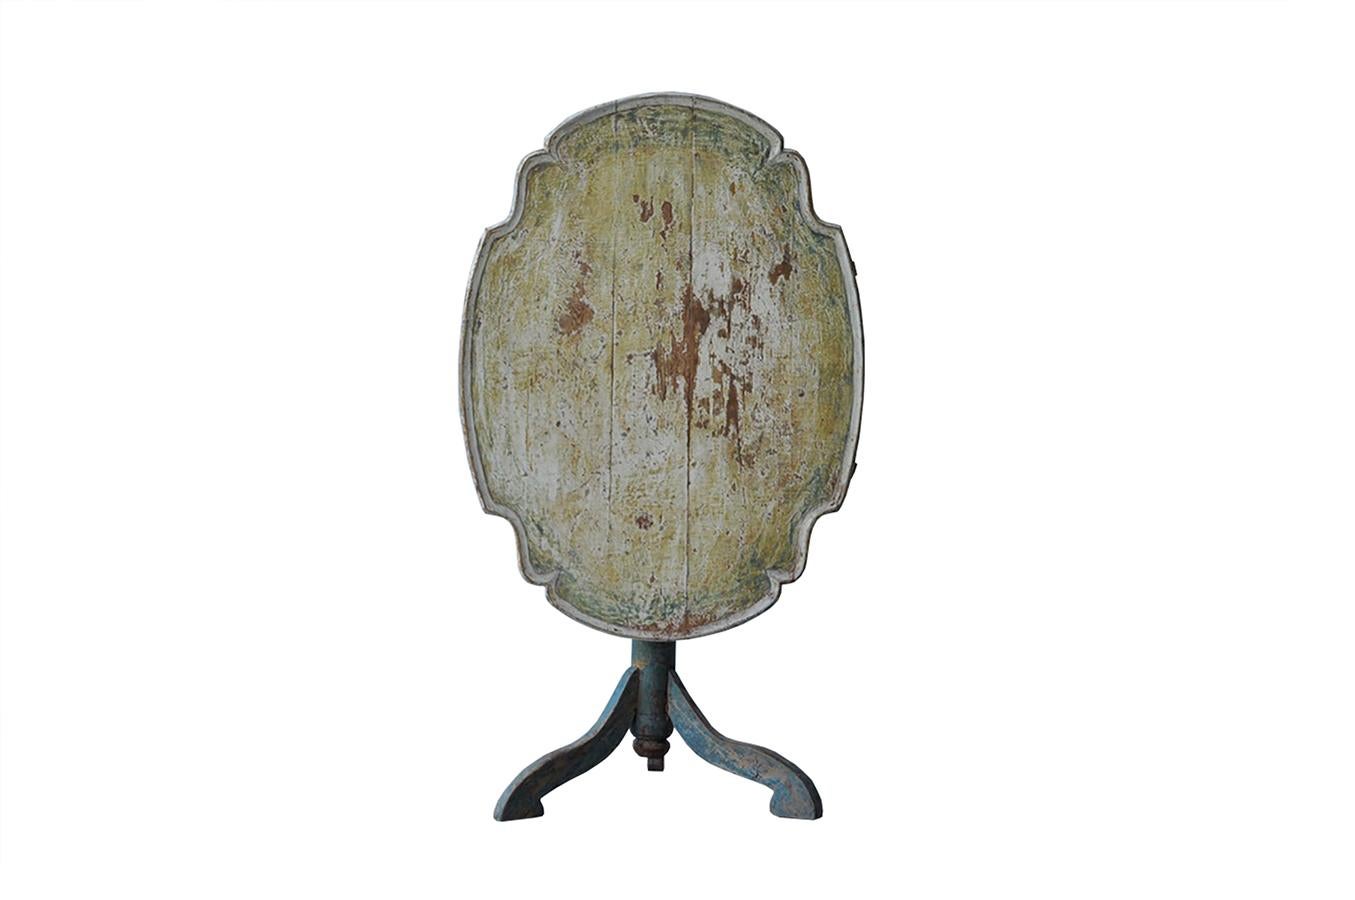 This original paint 18th century tilt-top table has been dry scraped to original paint and features a superb time worn patina.